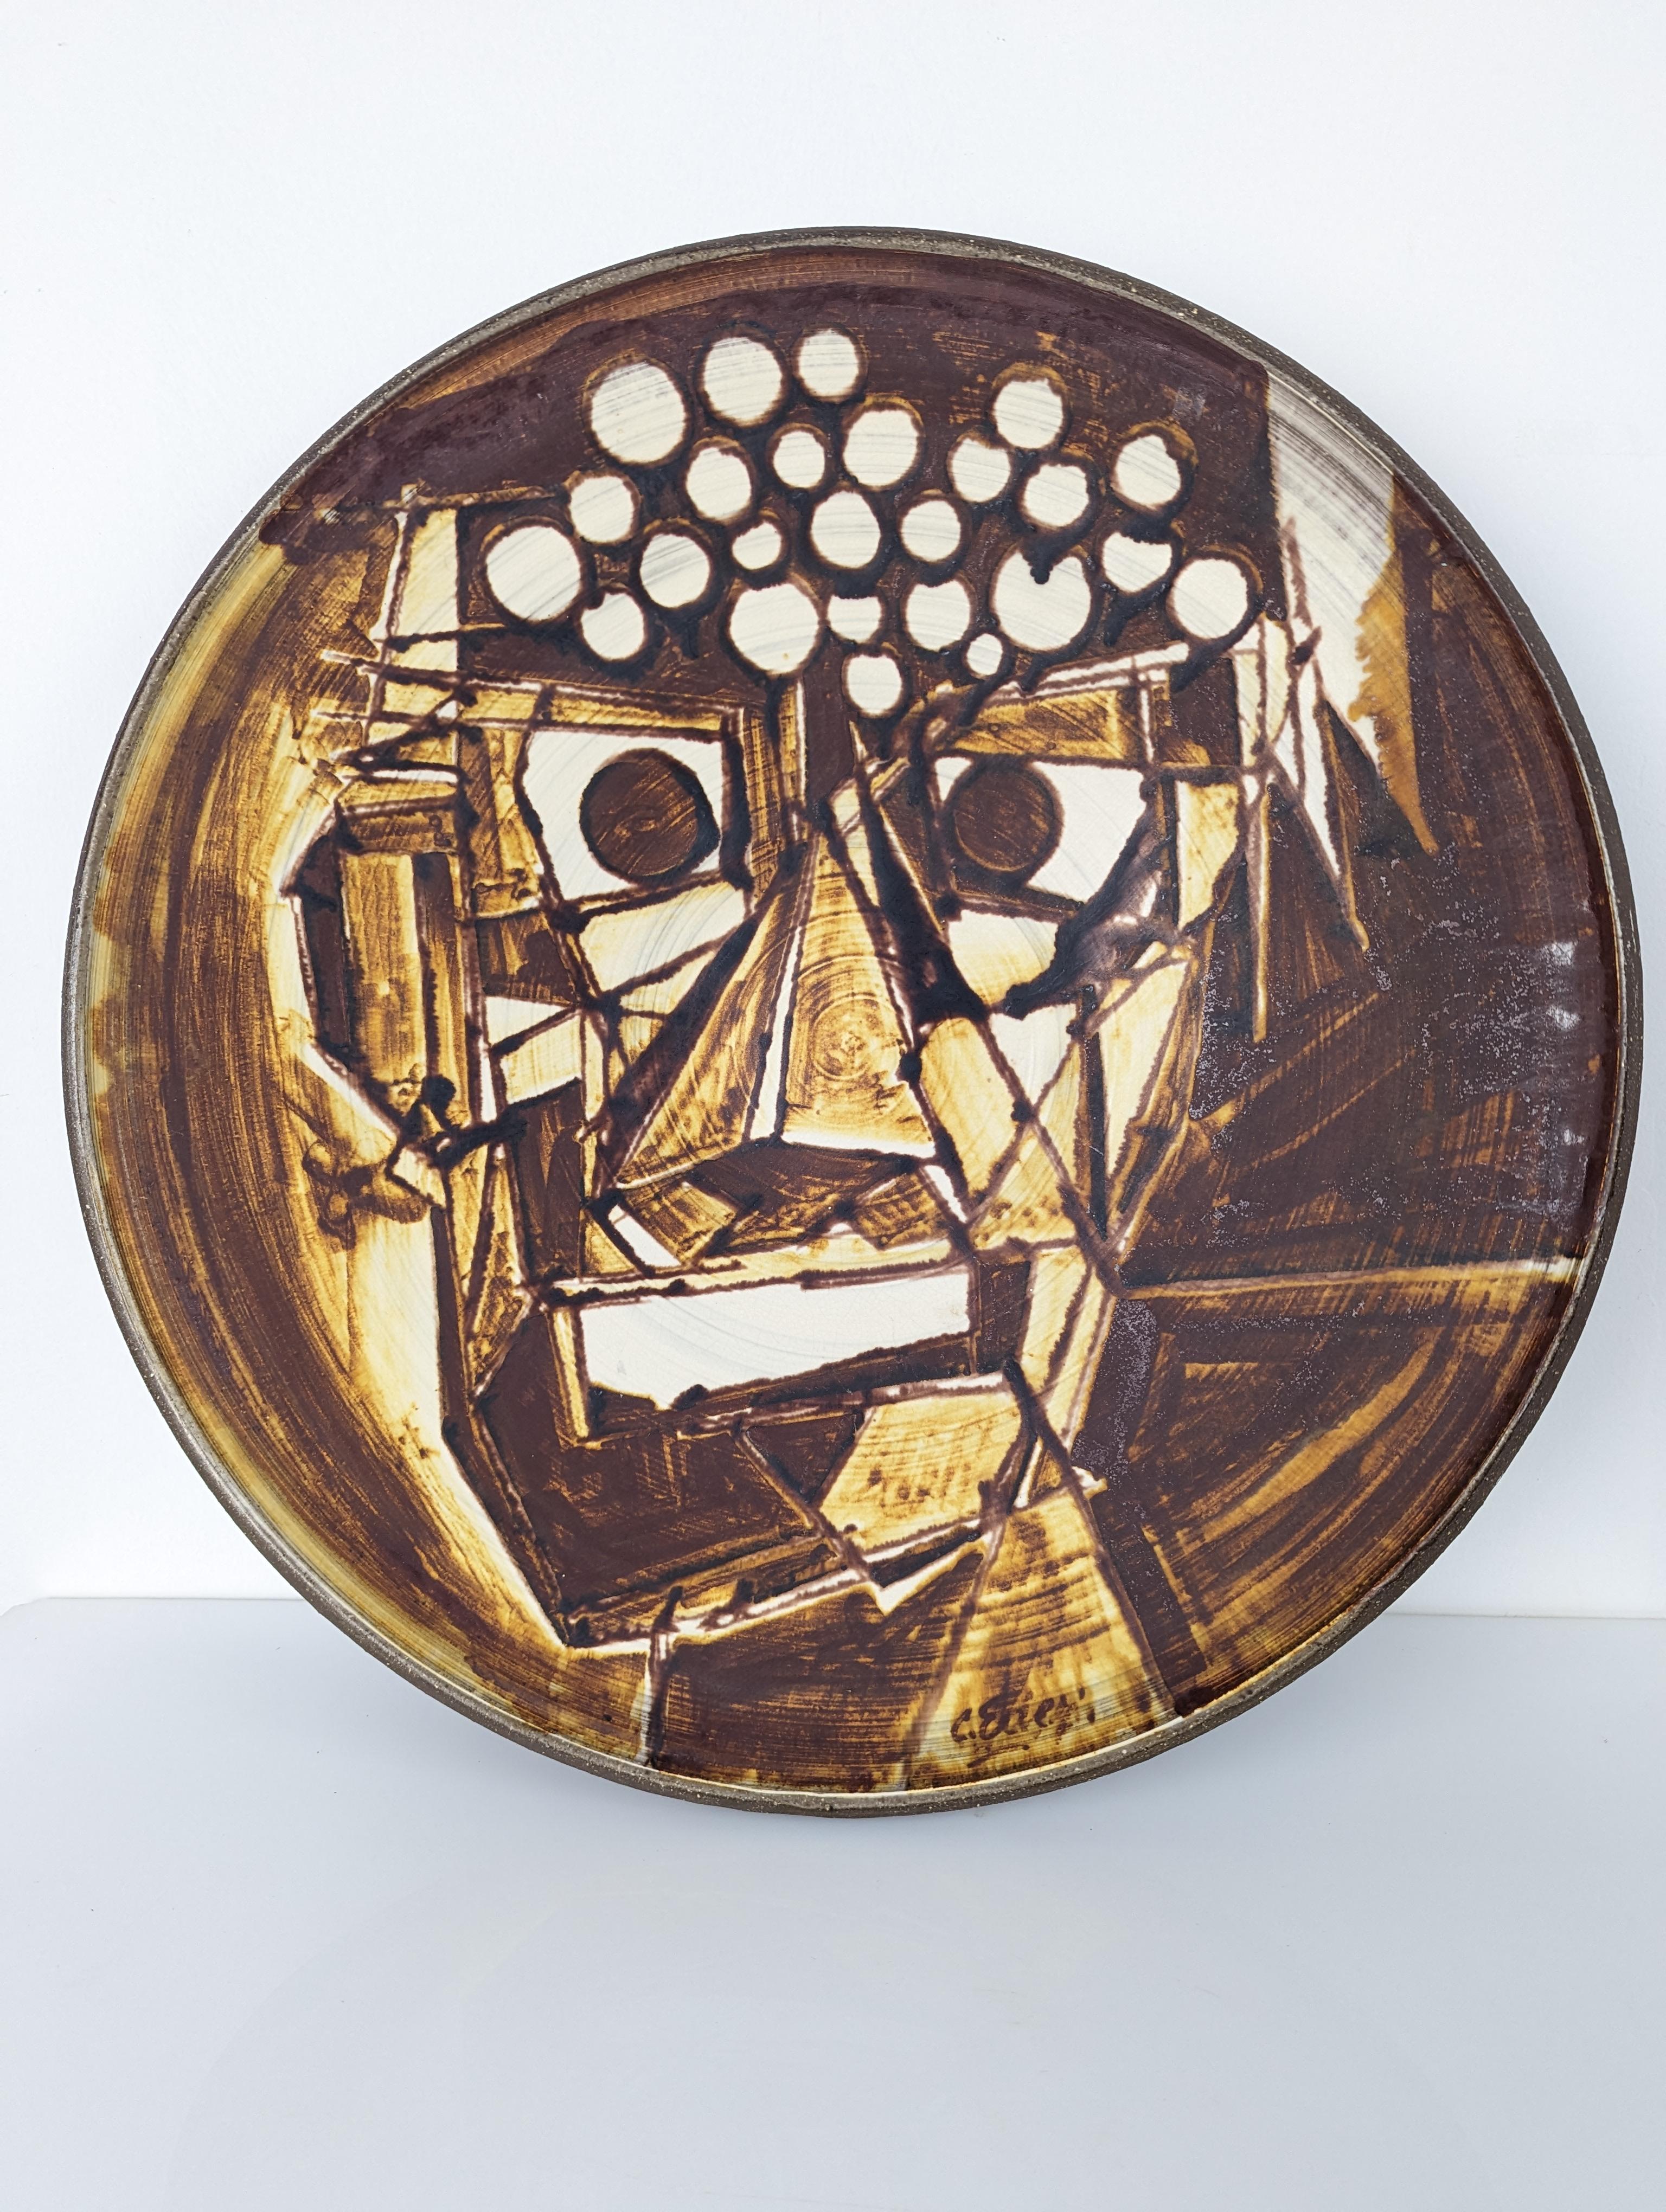 Spectacular large hand-painted plate, showing an incredible portrait with cubist features of great strength and quality, undoubtedly the work of a great mid-century artist yet to be documented. The work is signed on the front and back.